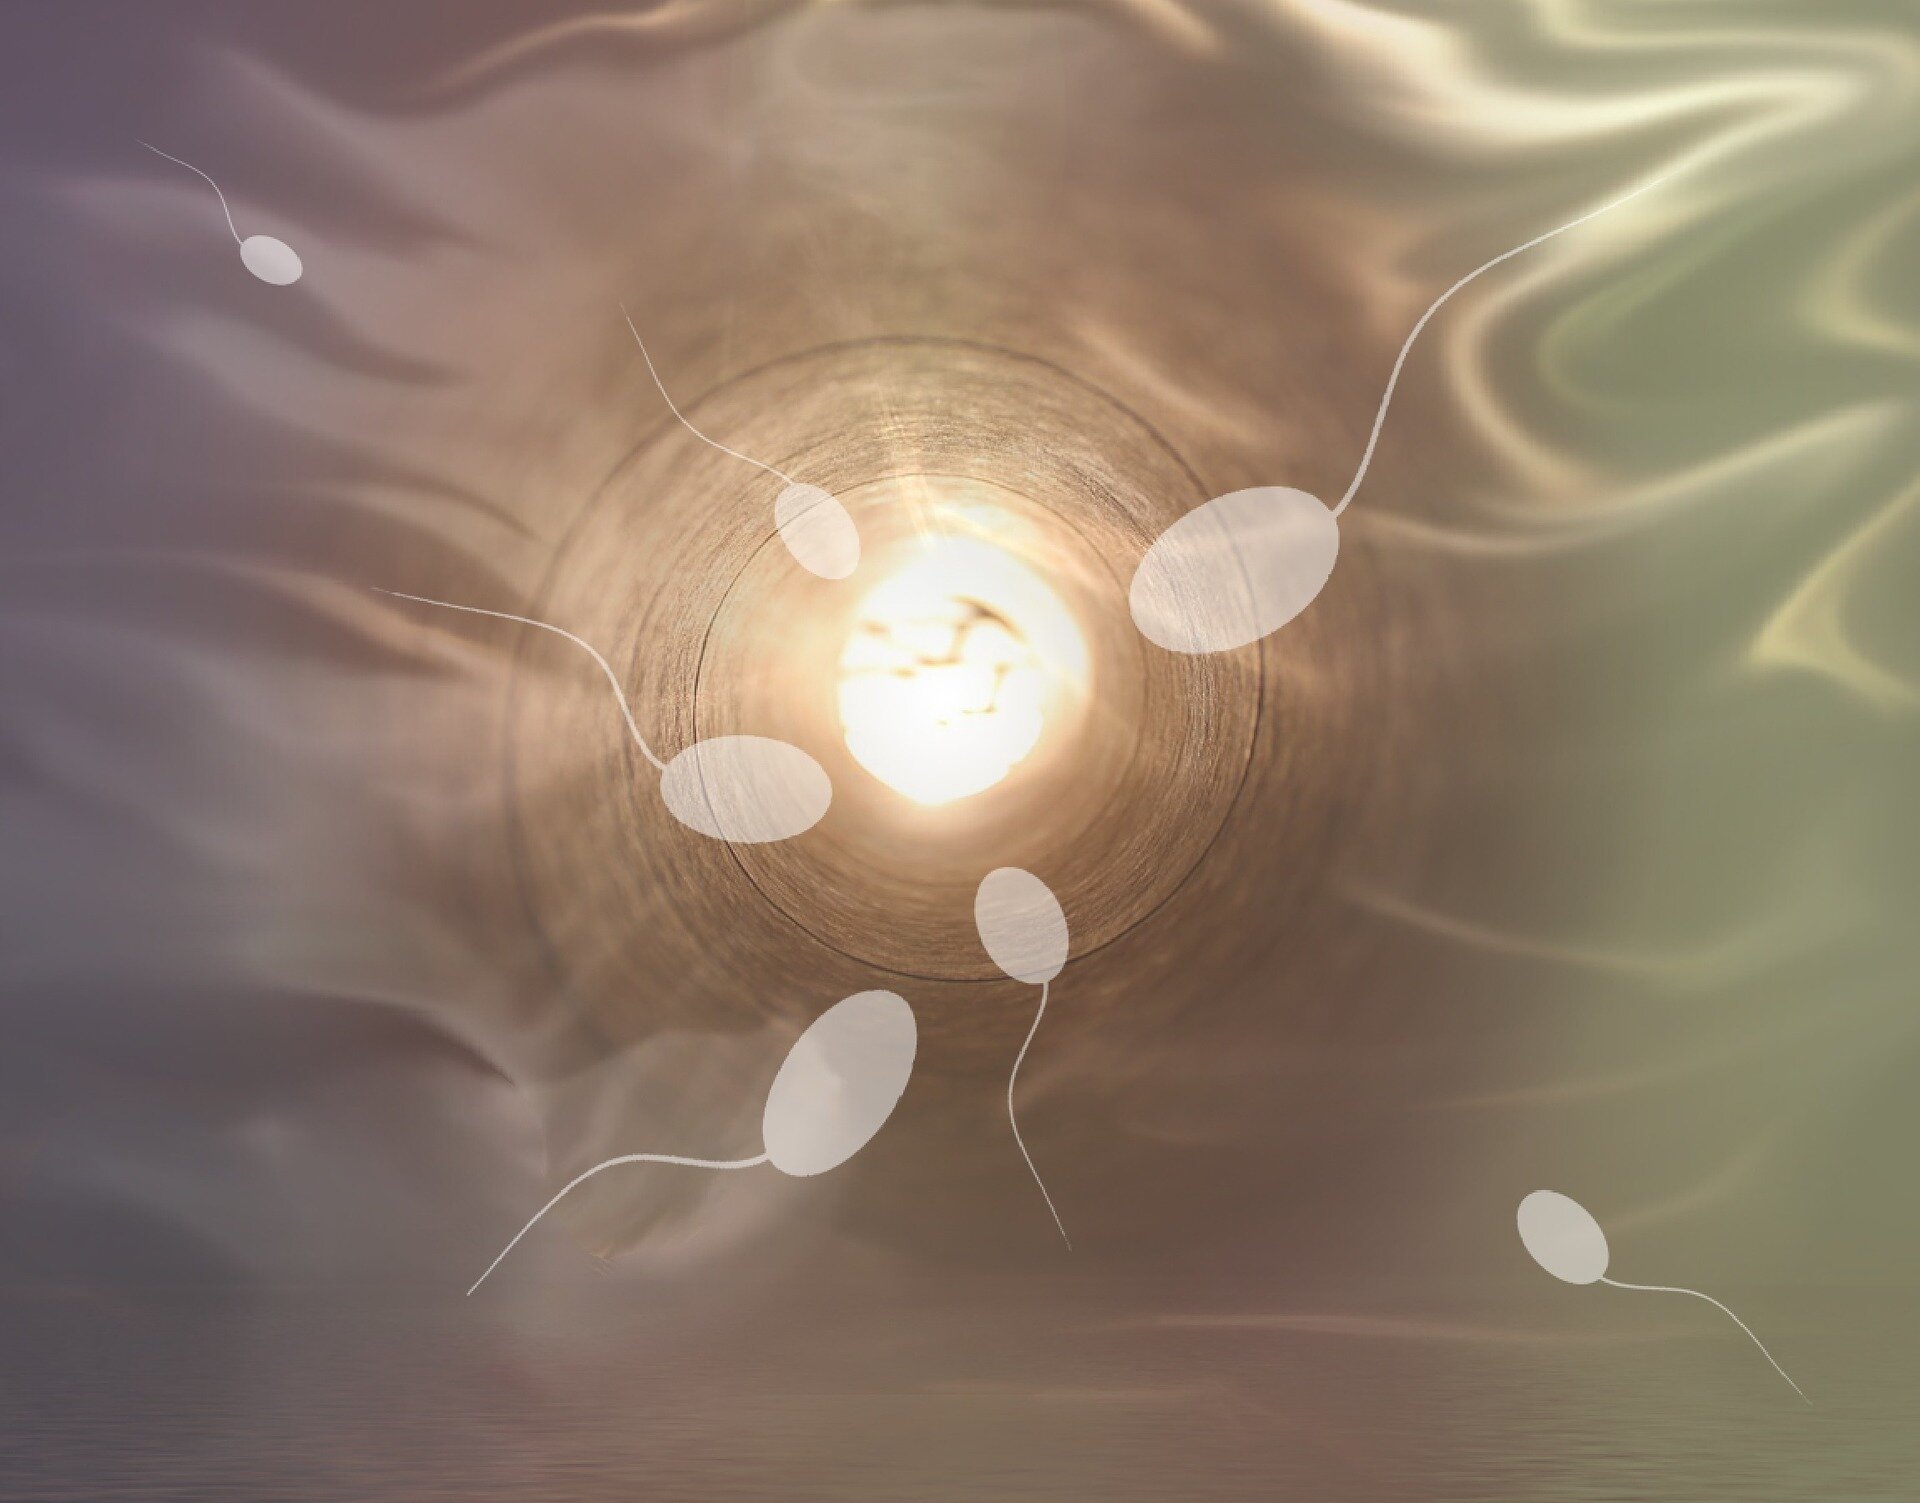 Researchers find no evidence that sperm count decreases